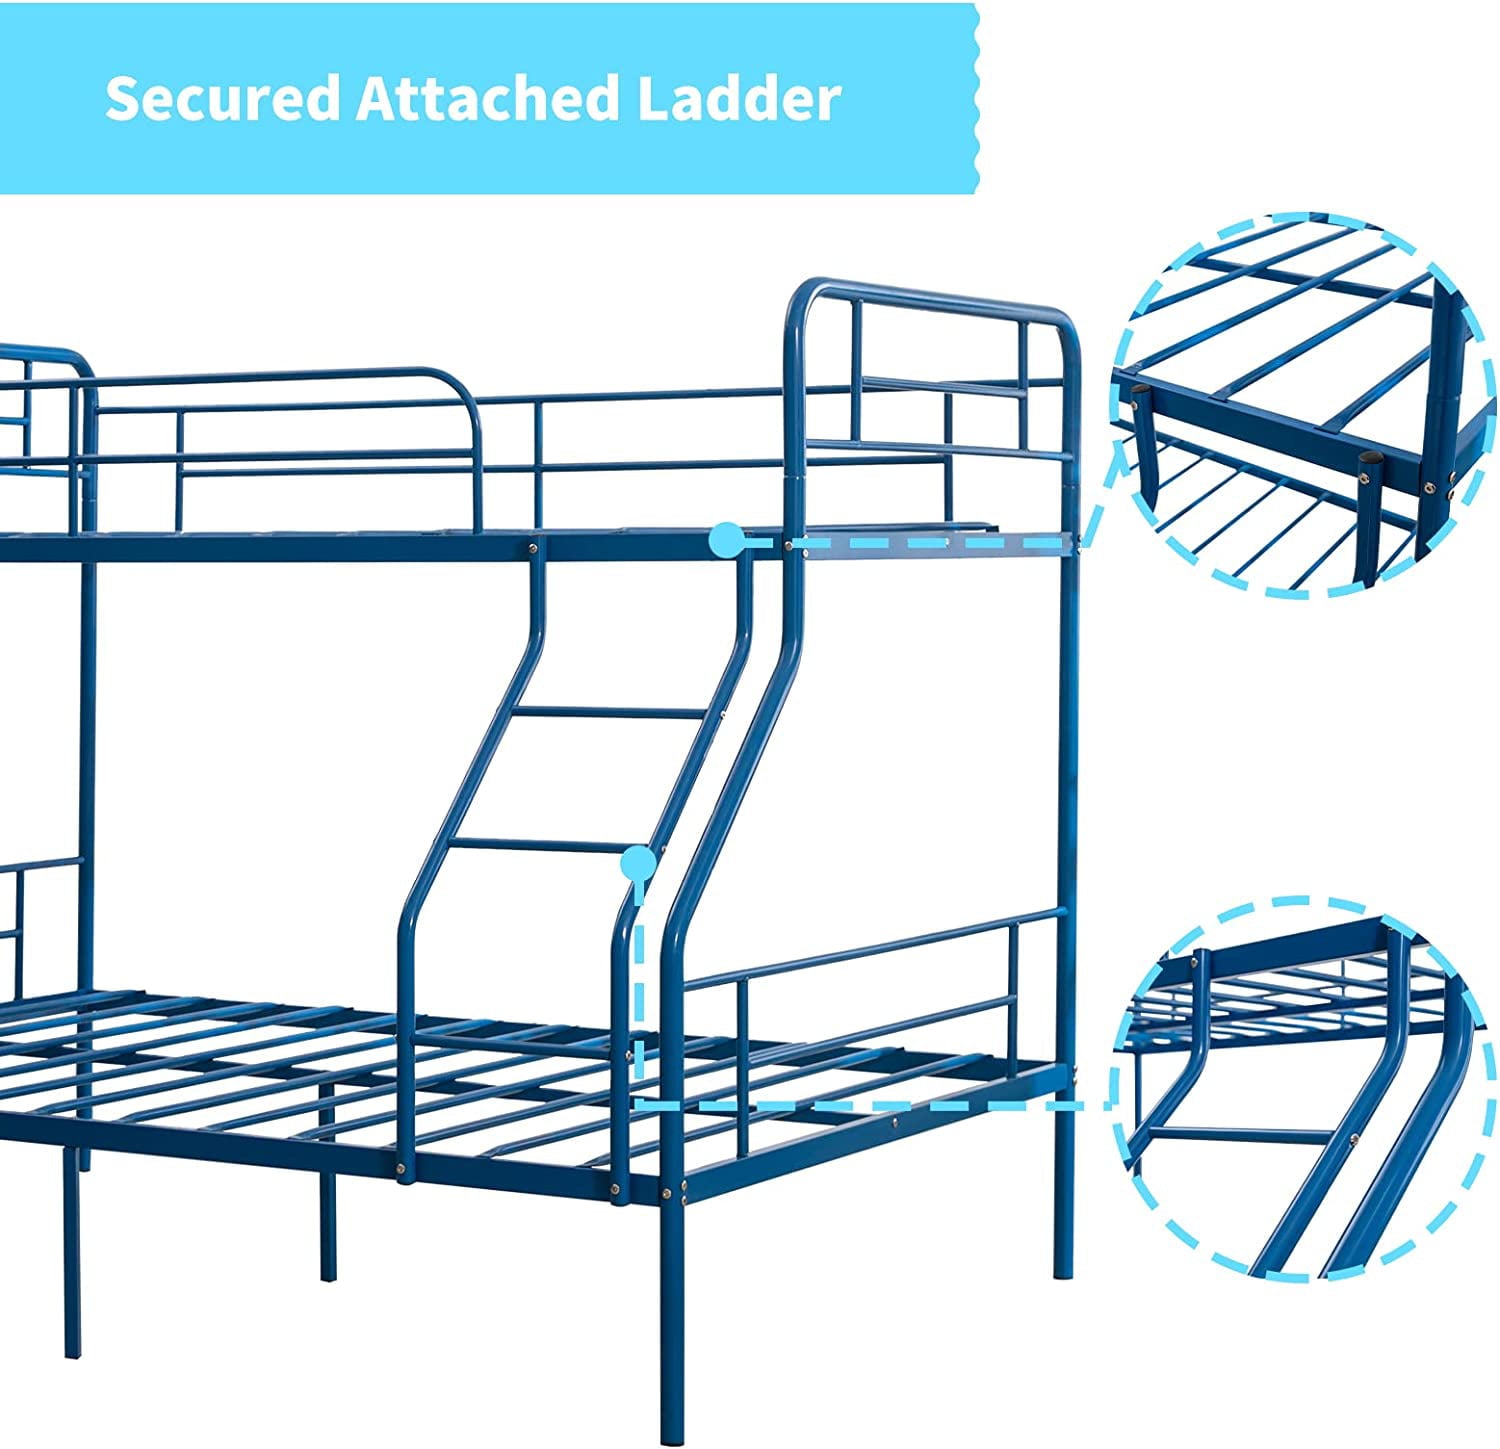 cuoote Heavy Duty Bunk Bed, Metal Twin Bunk Beds for Kids w/Ladder and Guardrail, Space-Saving Design, No Box Spring Needed, Navy Blue